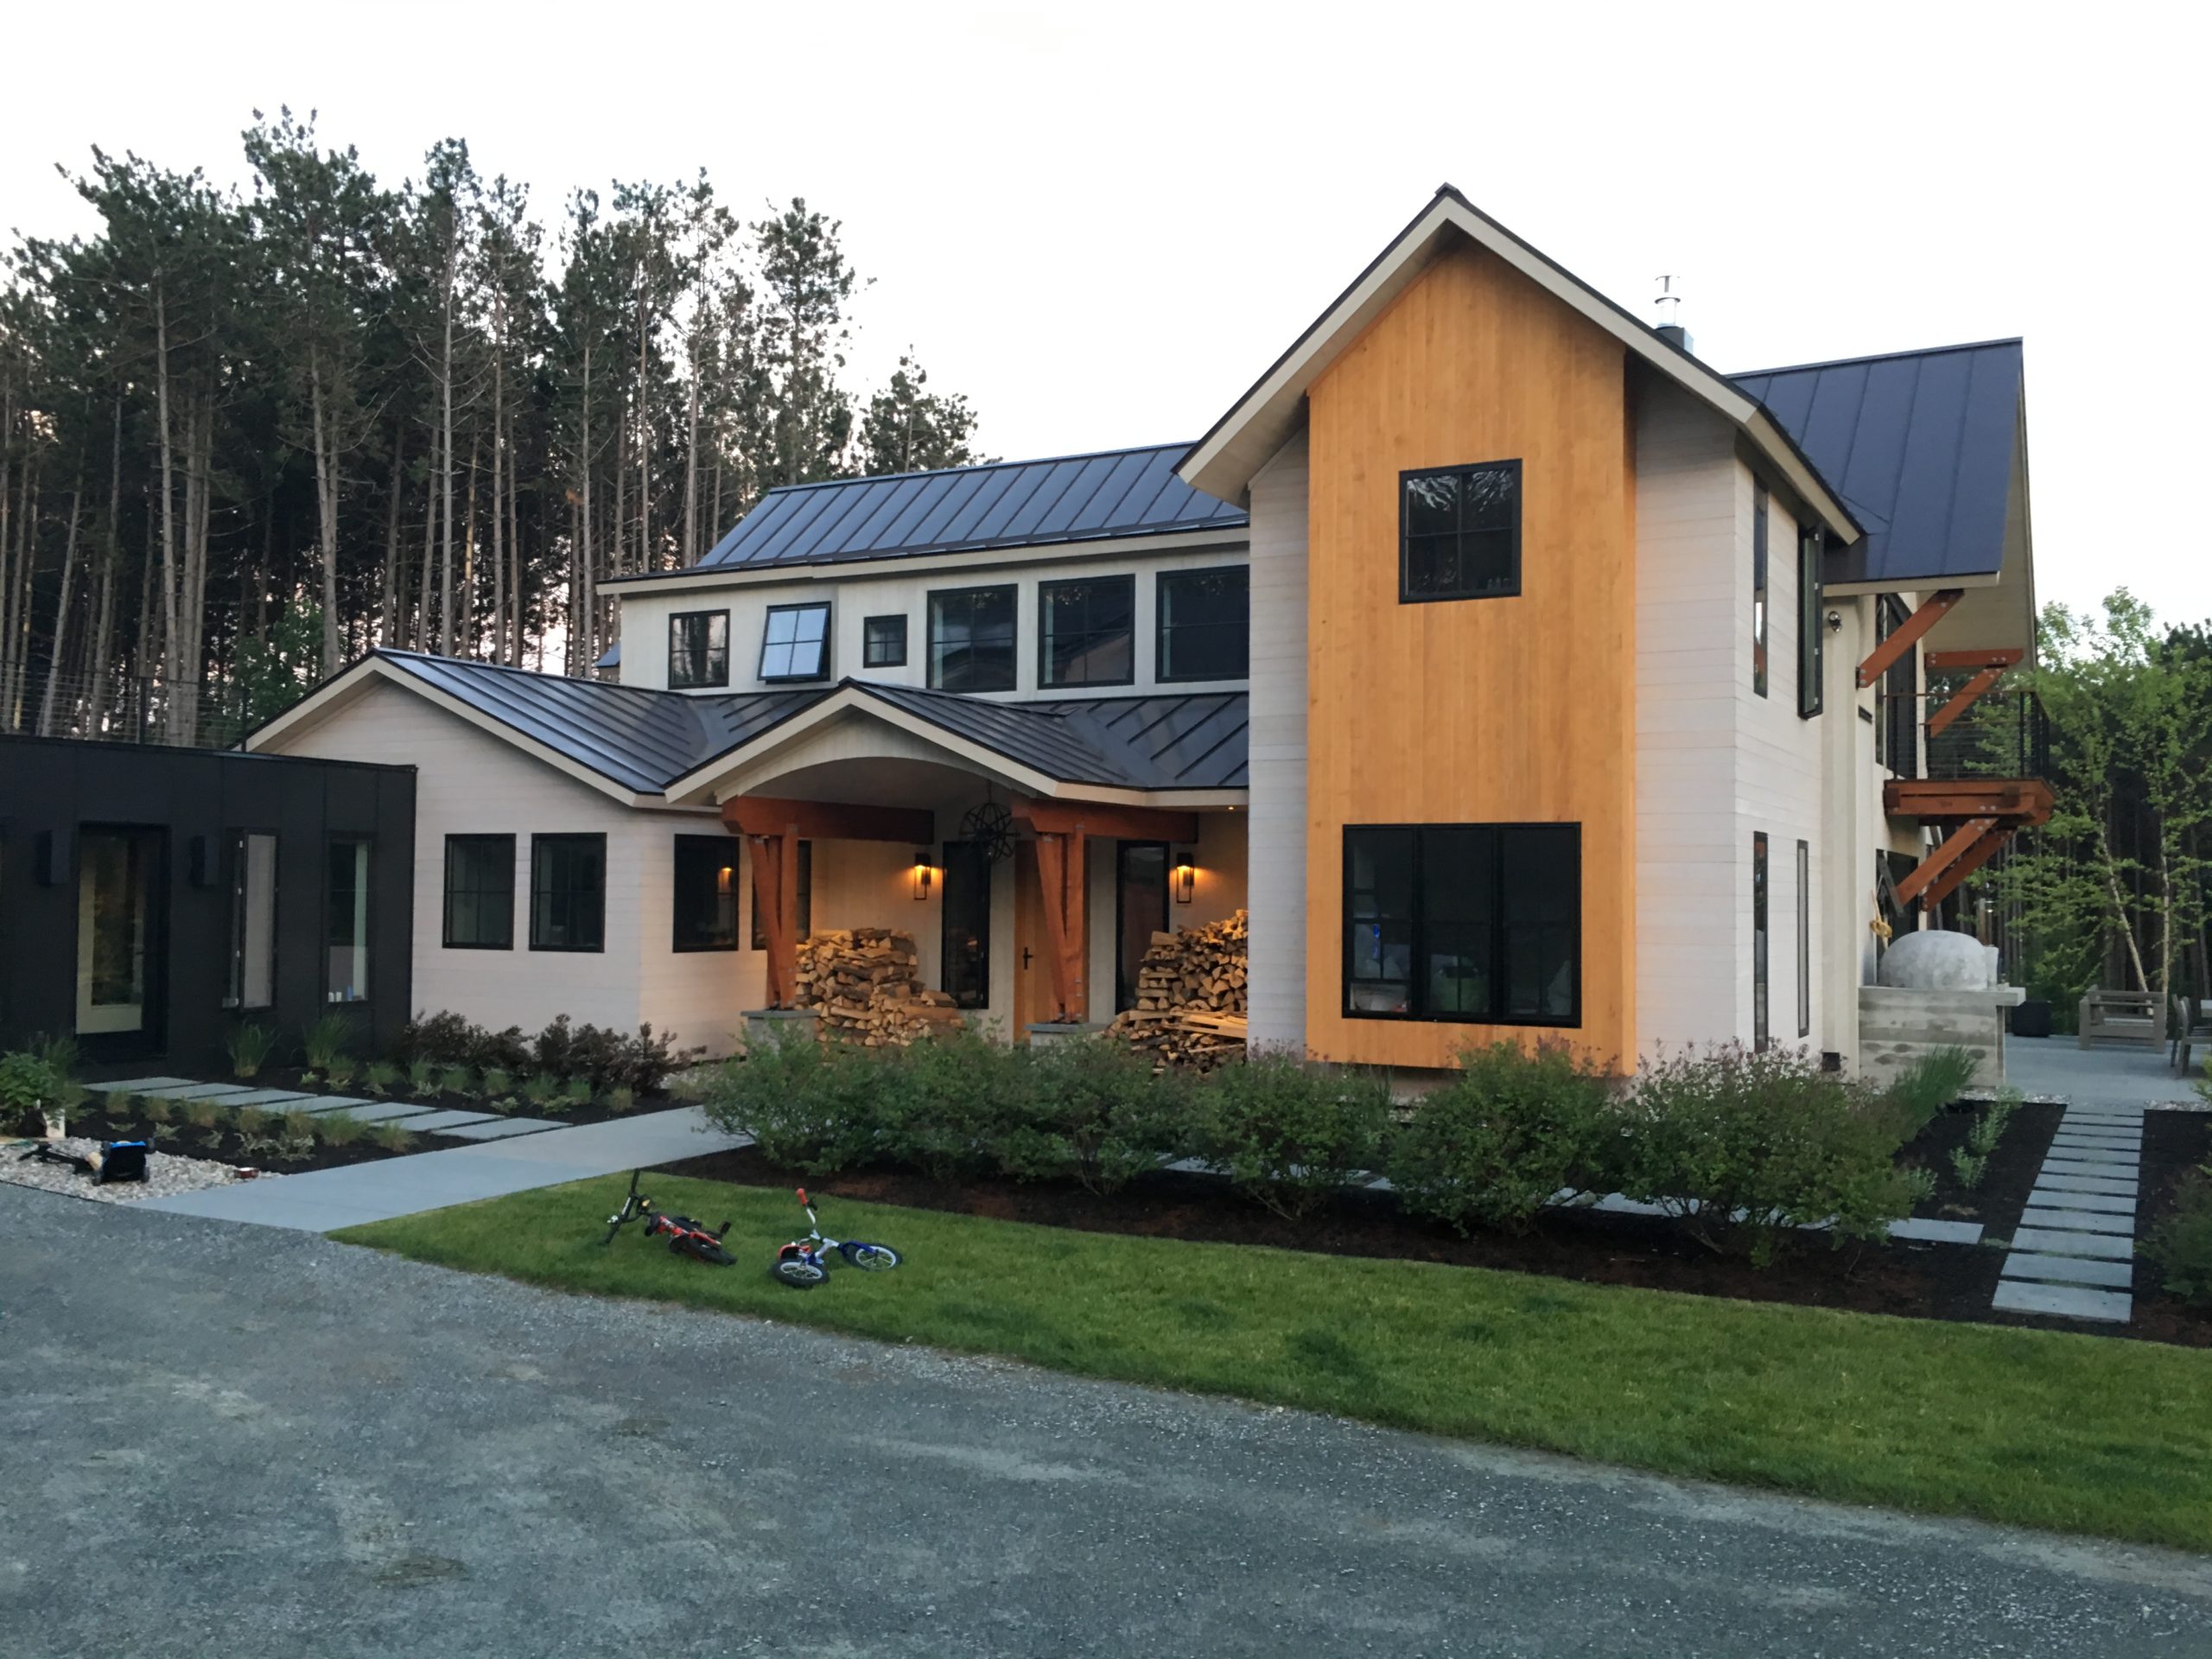 Finished exterior of a timber frame home that had wall SIPs installed.